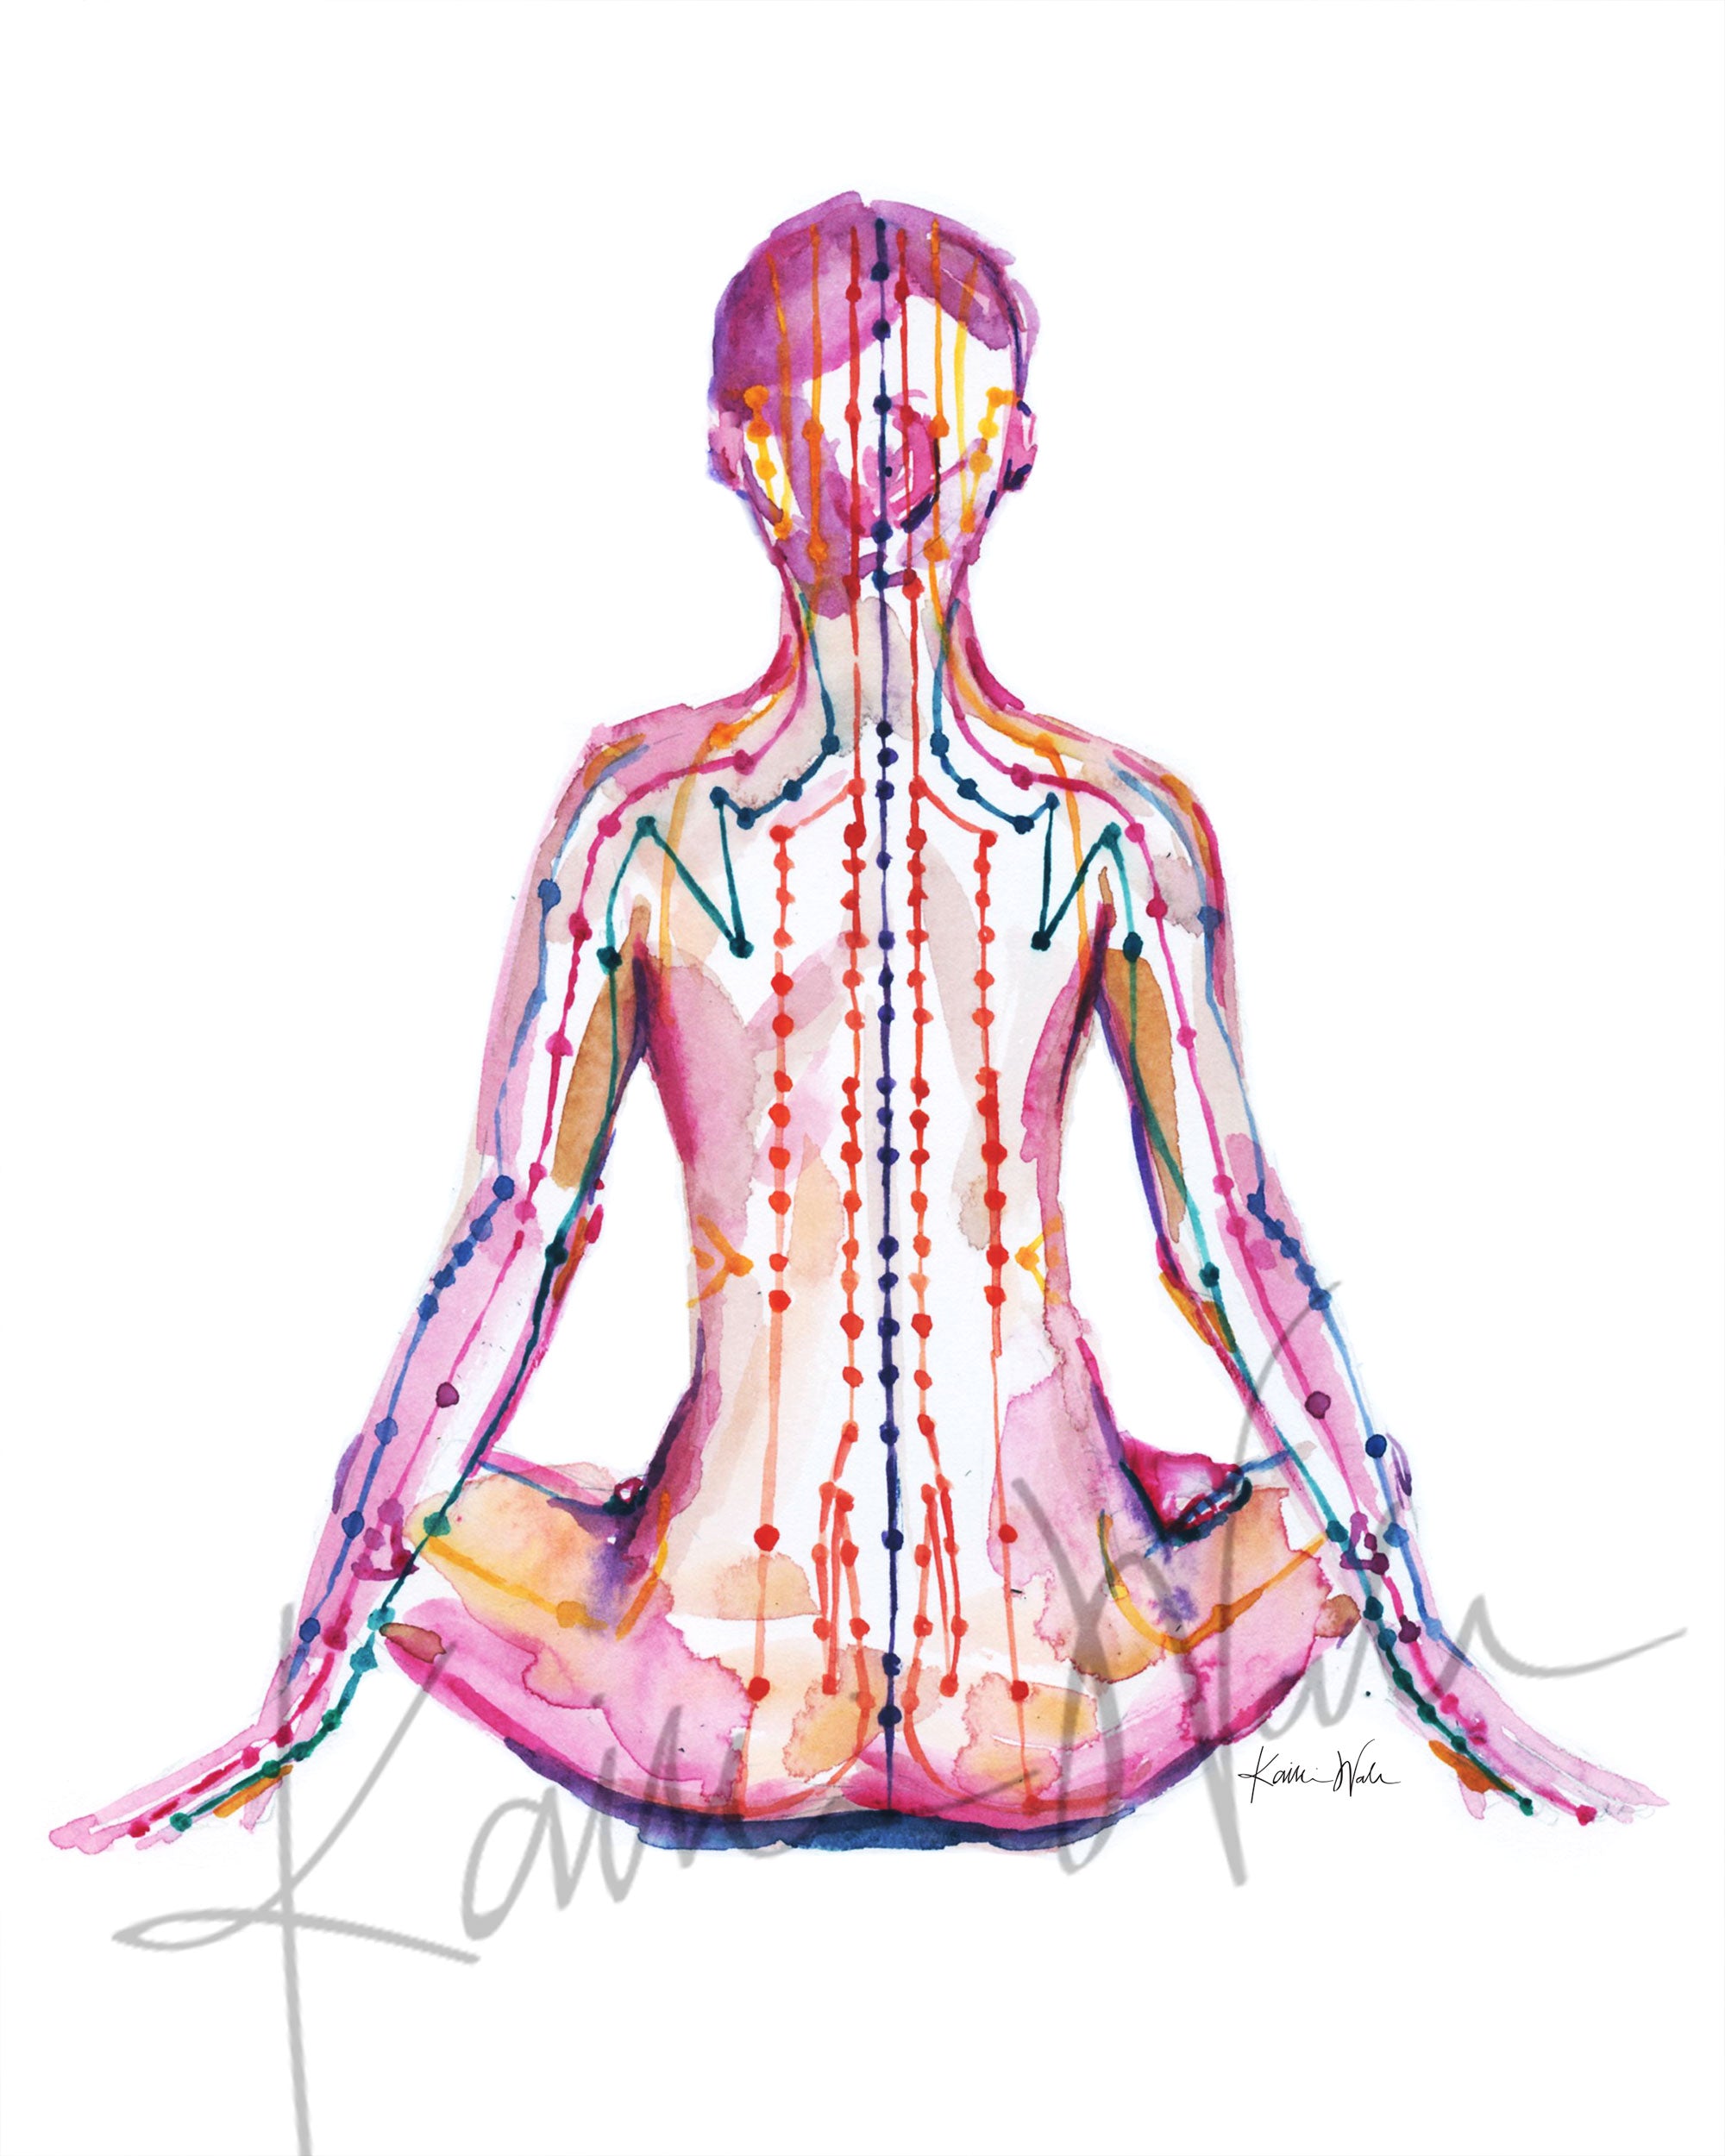 Unframed watercolor painting of a person sitting in a meditative pose with meridian paths showing.